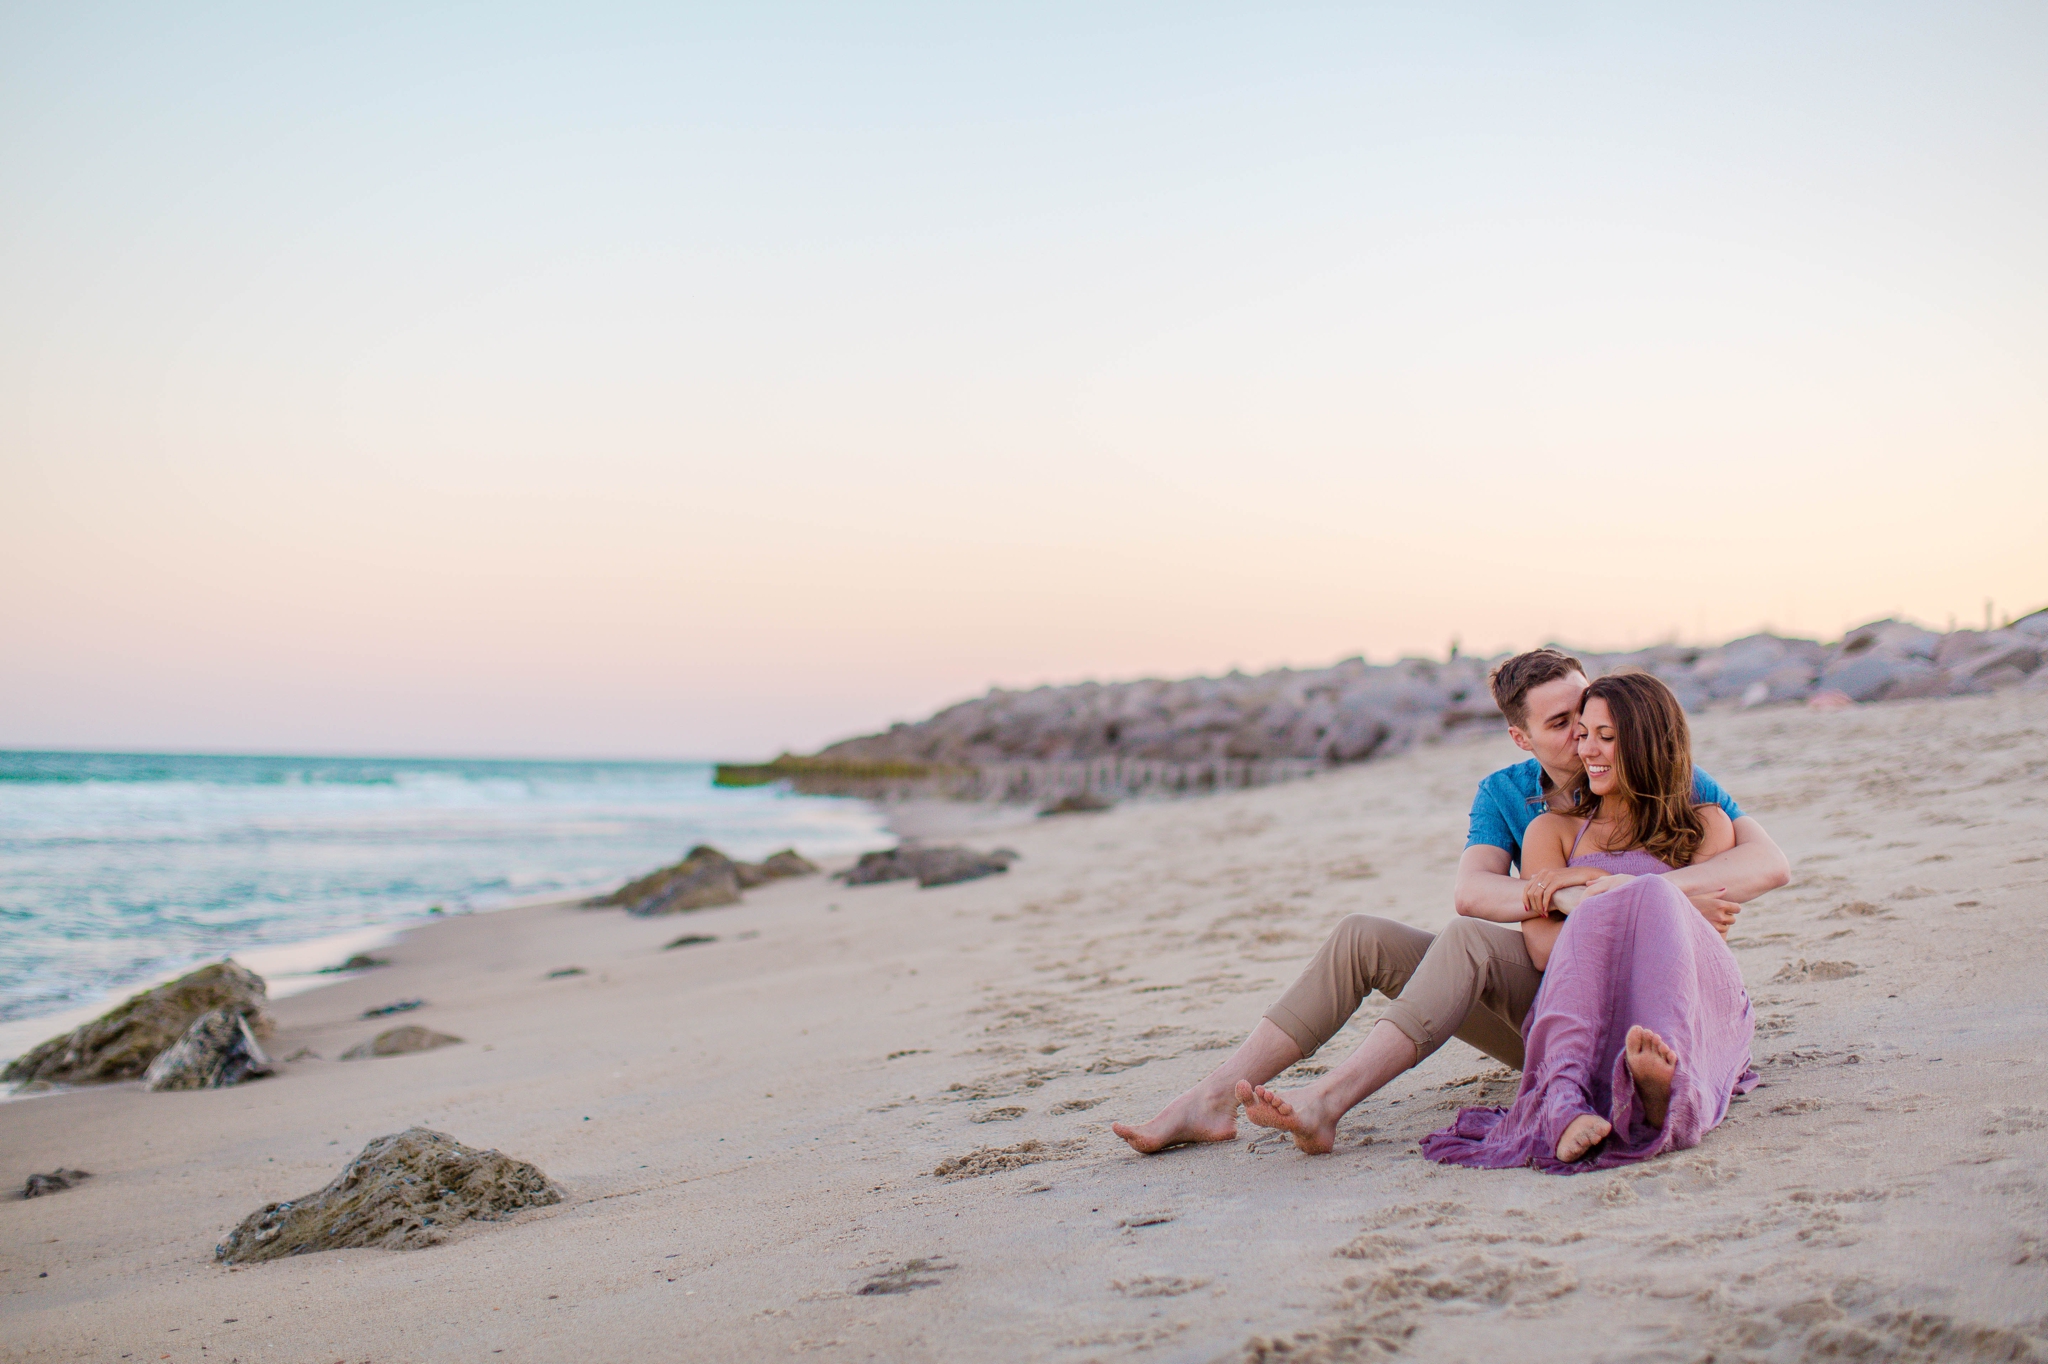  man and woman sitting in the sand - - Woman is in a flowy pastel maxi dress - candid and unposed golden light session - beach engagement photographer in honolulu, oahu, hawaii - johanna dye photography 